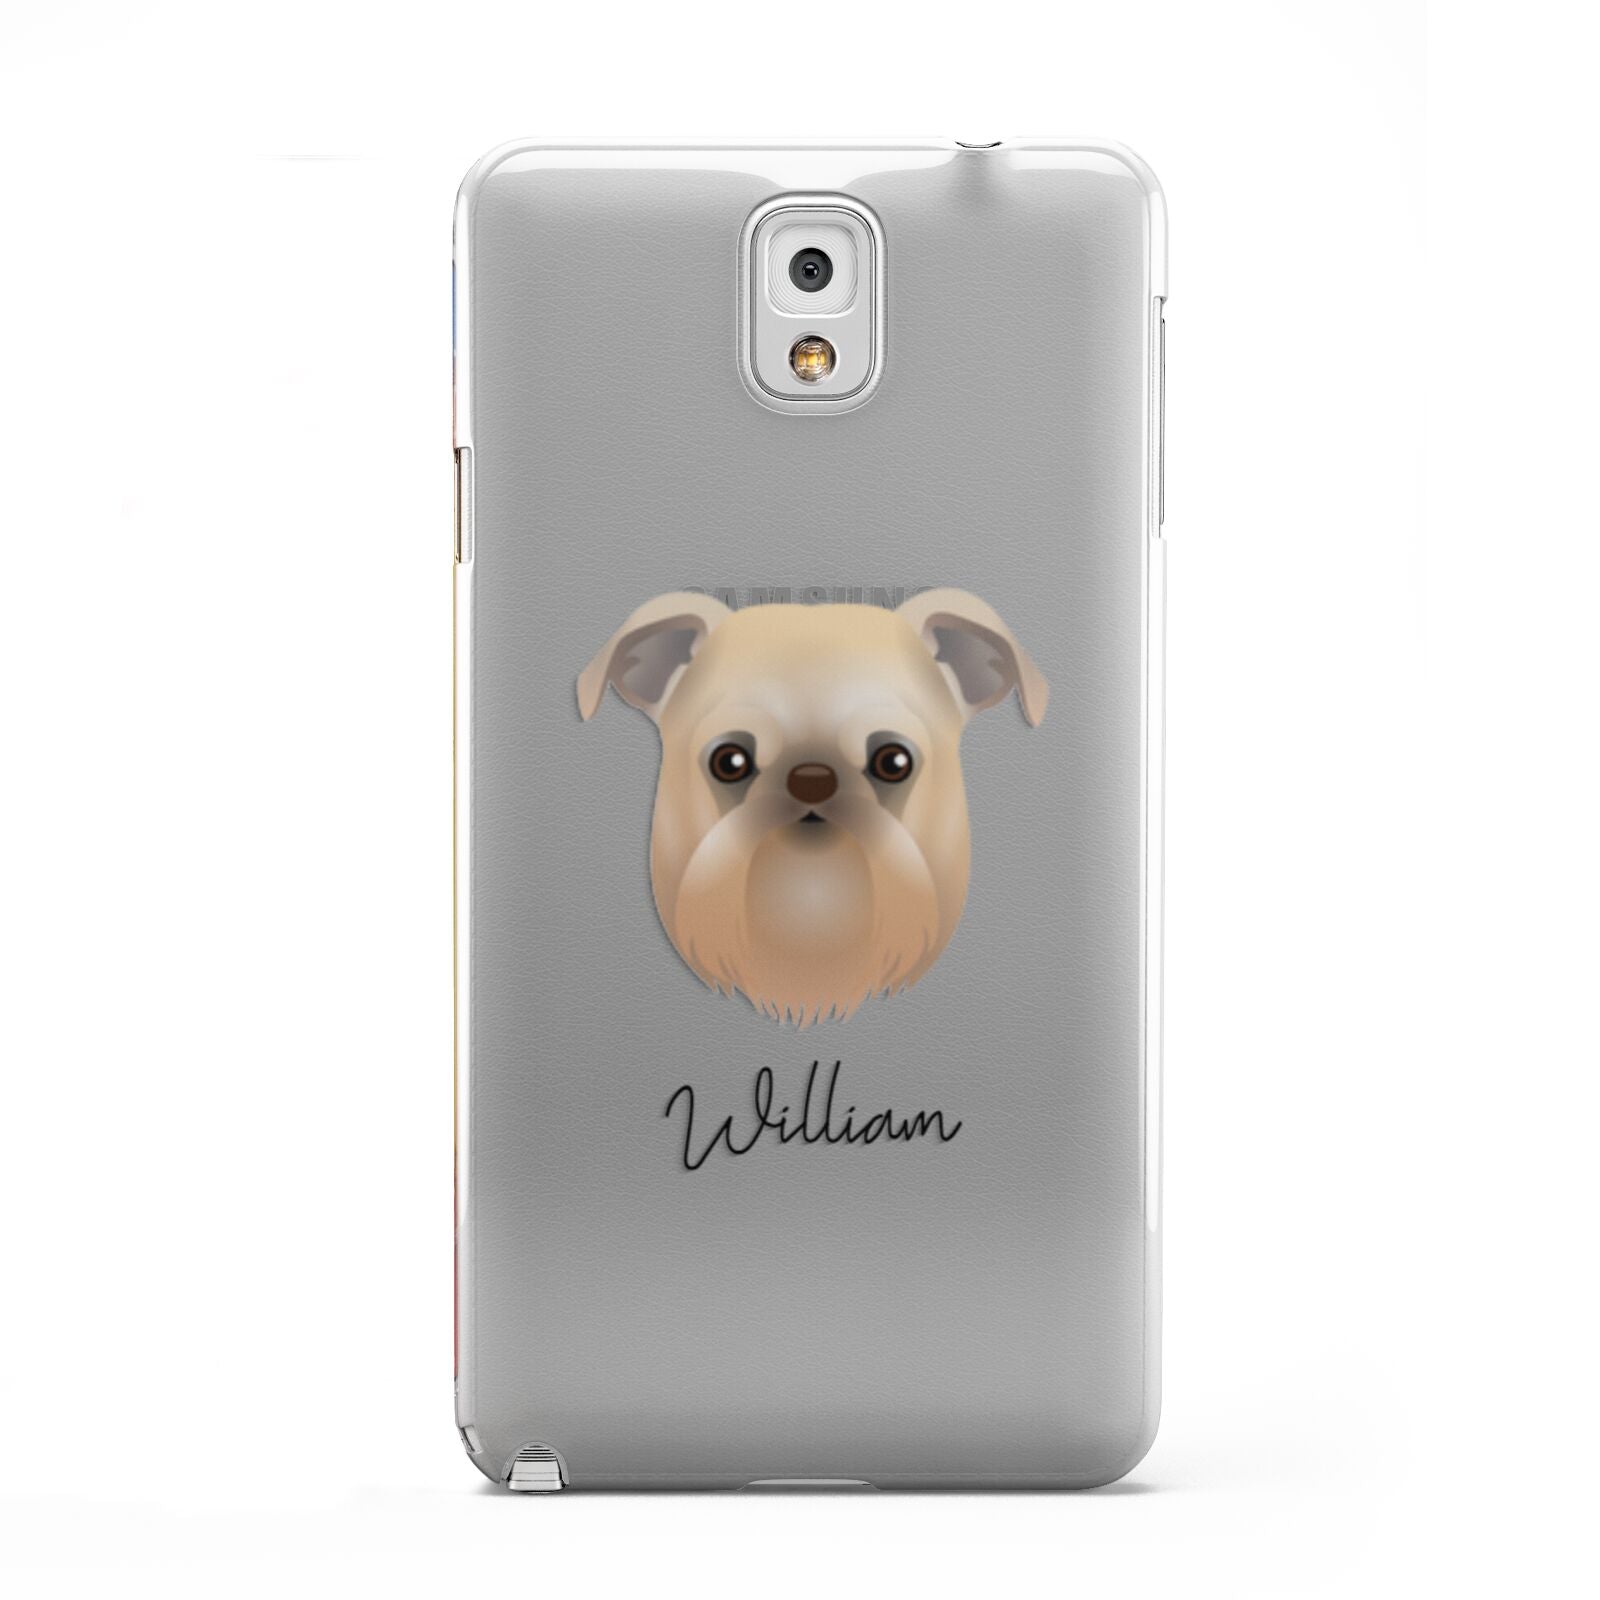 Griffon Bruxellois Personalised Samsung Galaxy Note 3 Case